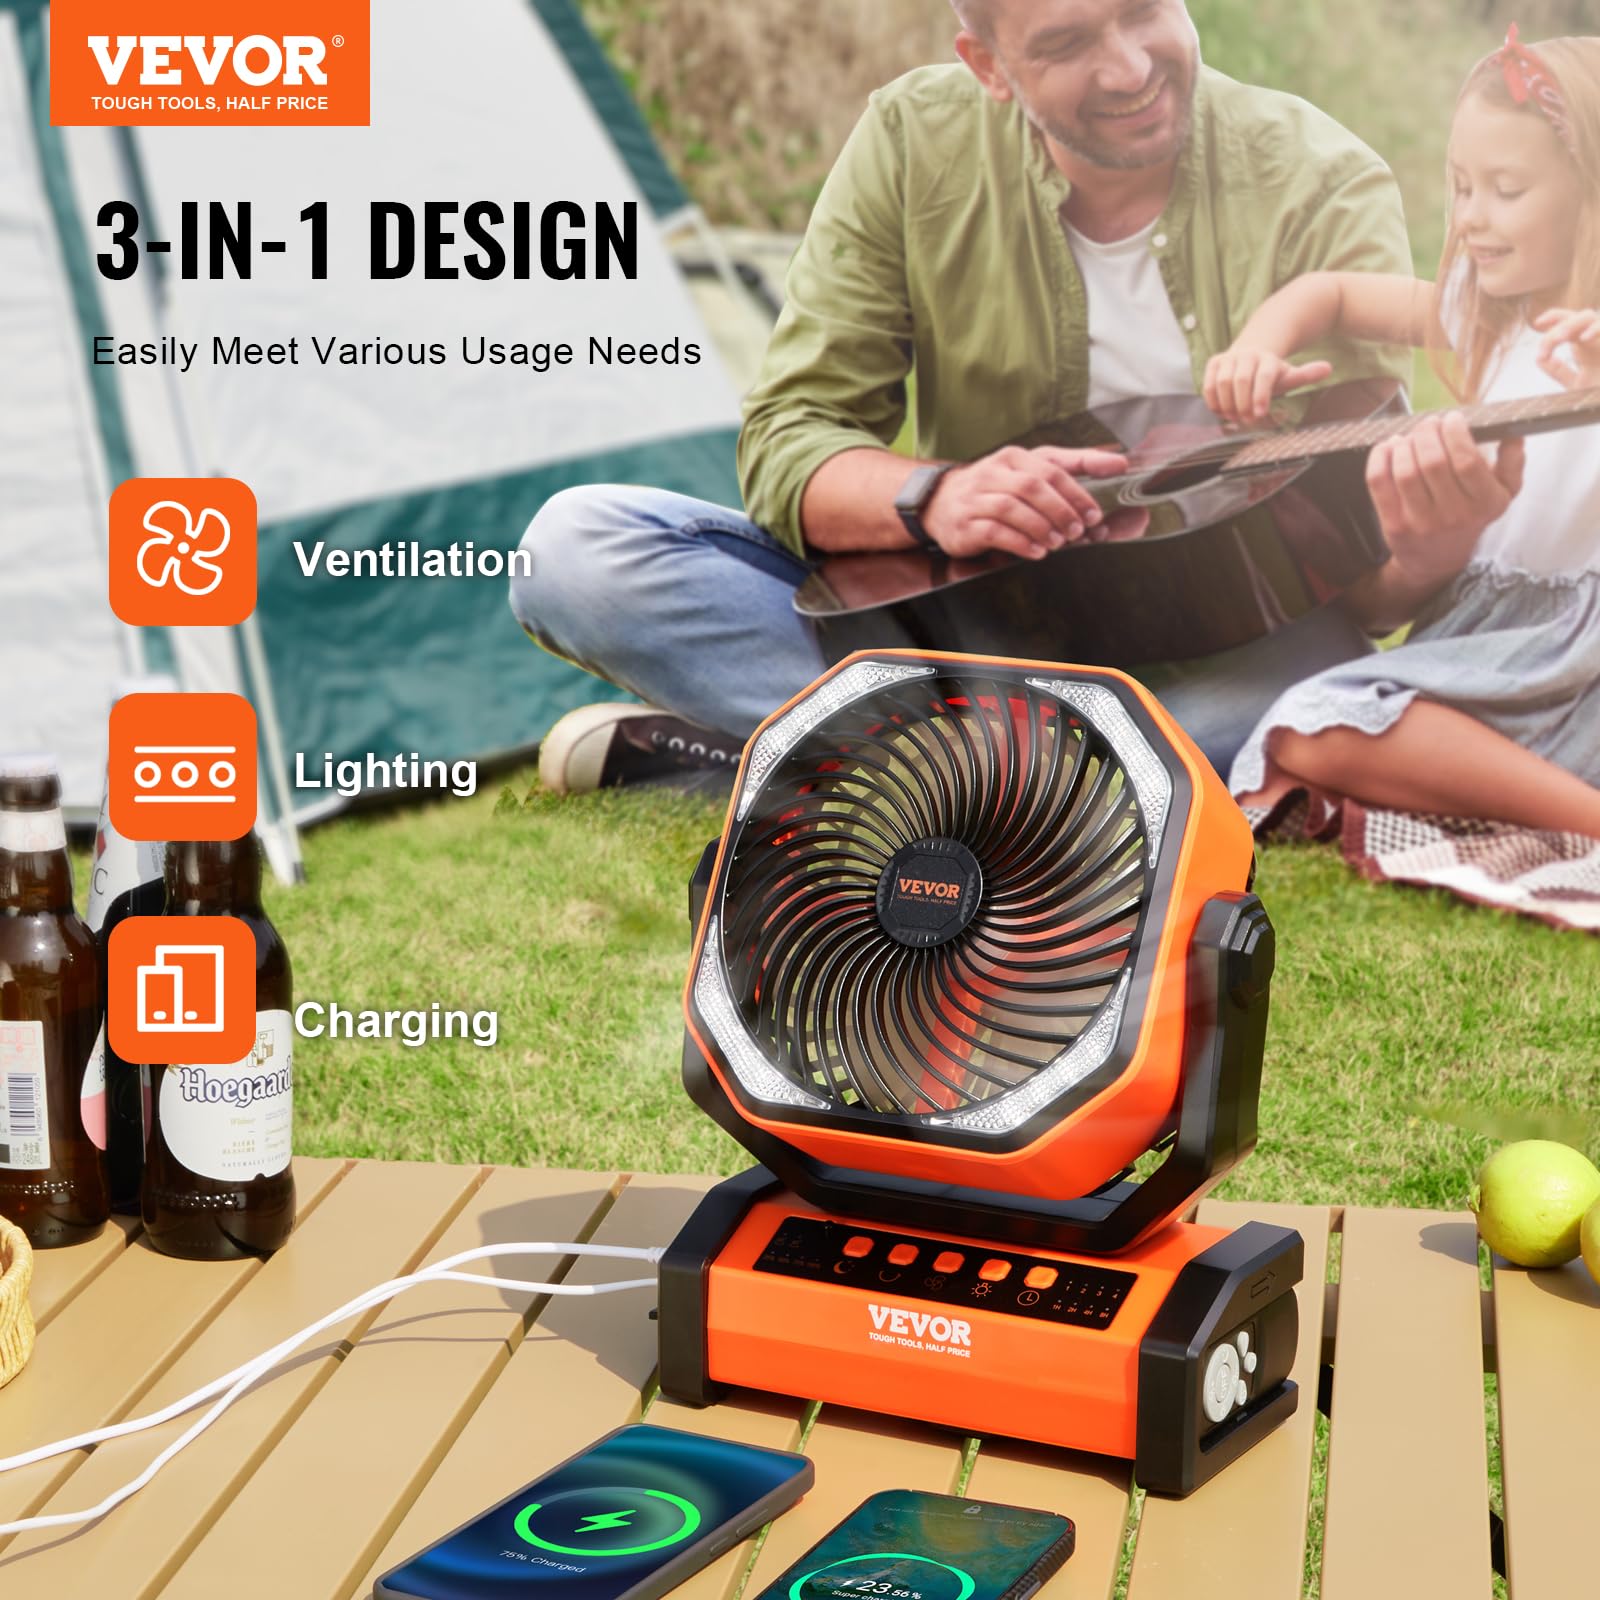 VEVOR 20,000mAh Camping Fan, 9 Inch Battery Operated Fan, Rechargeable Fan Portable with 4 Speeds, Auto Oscillating & Timer, Outdoor Tent Fan with Remote & Hook for Picnic, Barbecue, Fishing, Travel